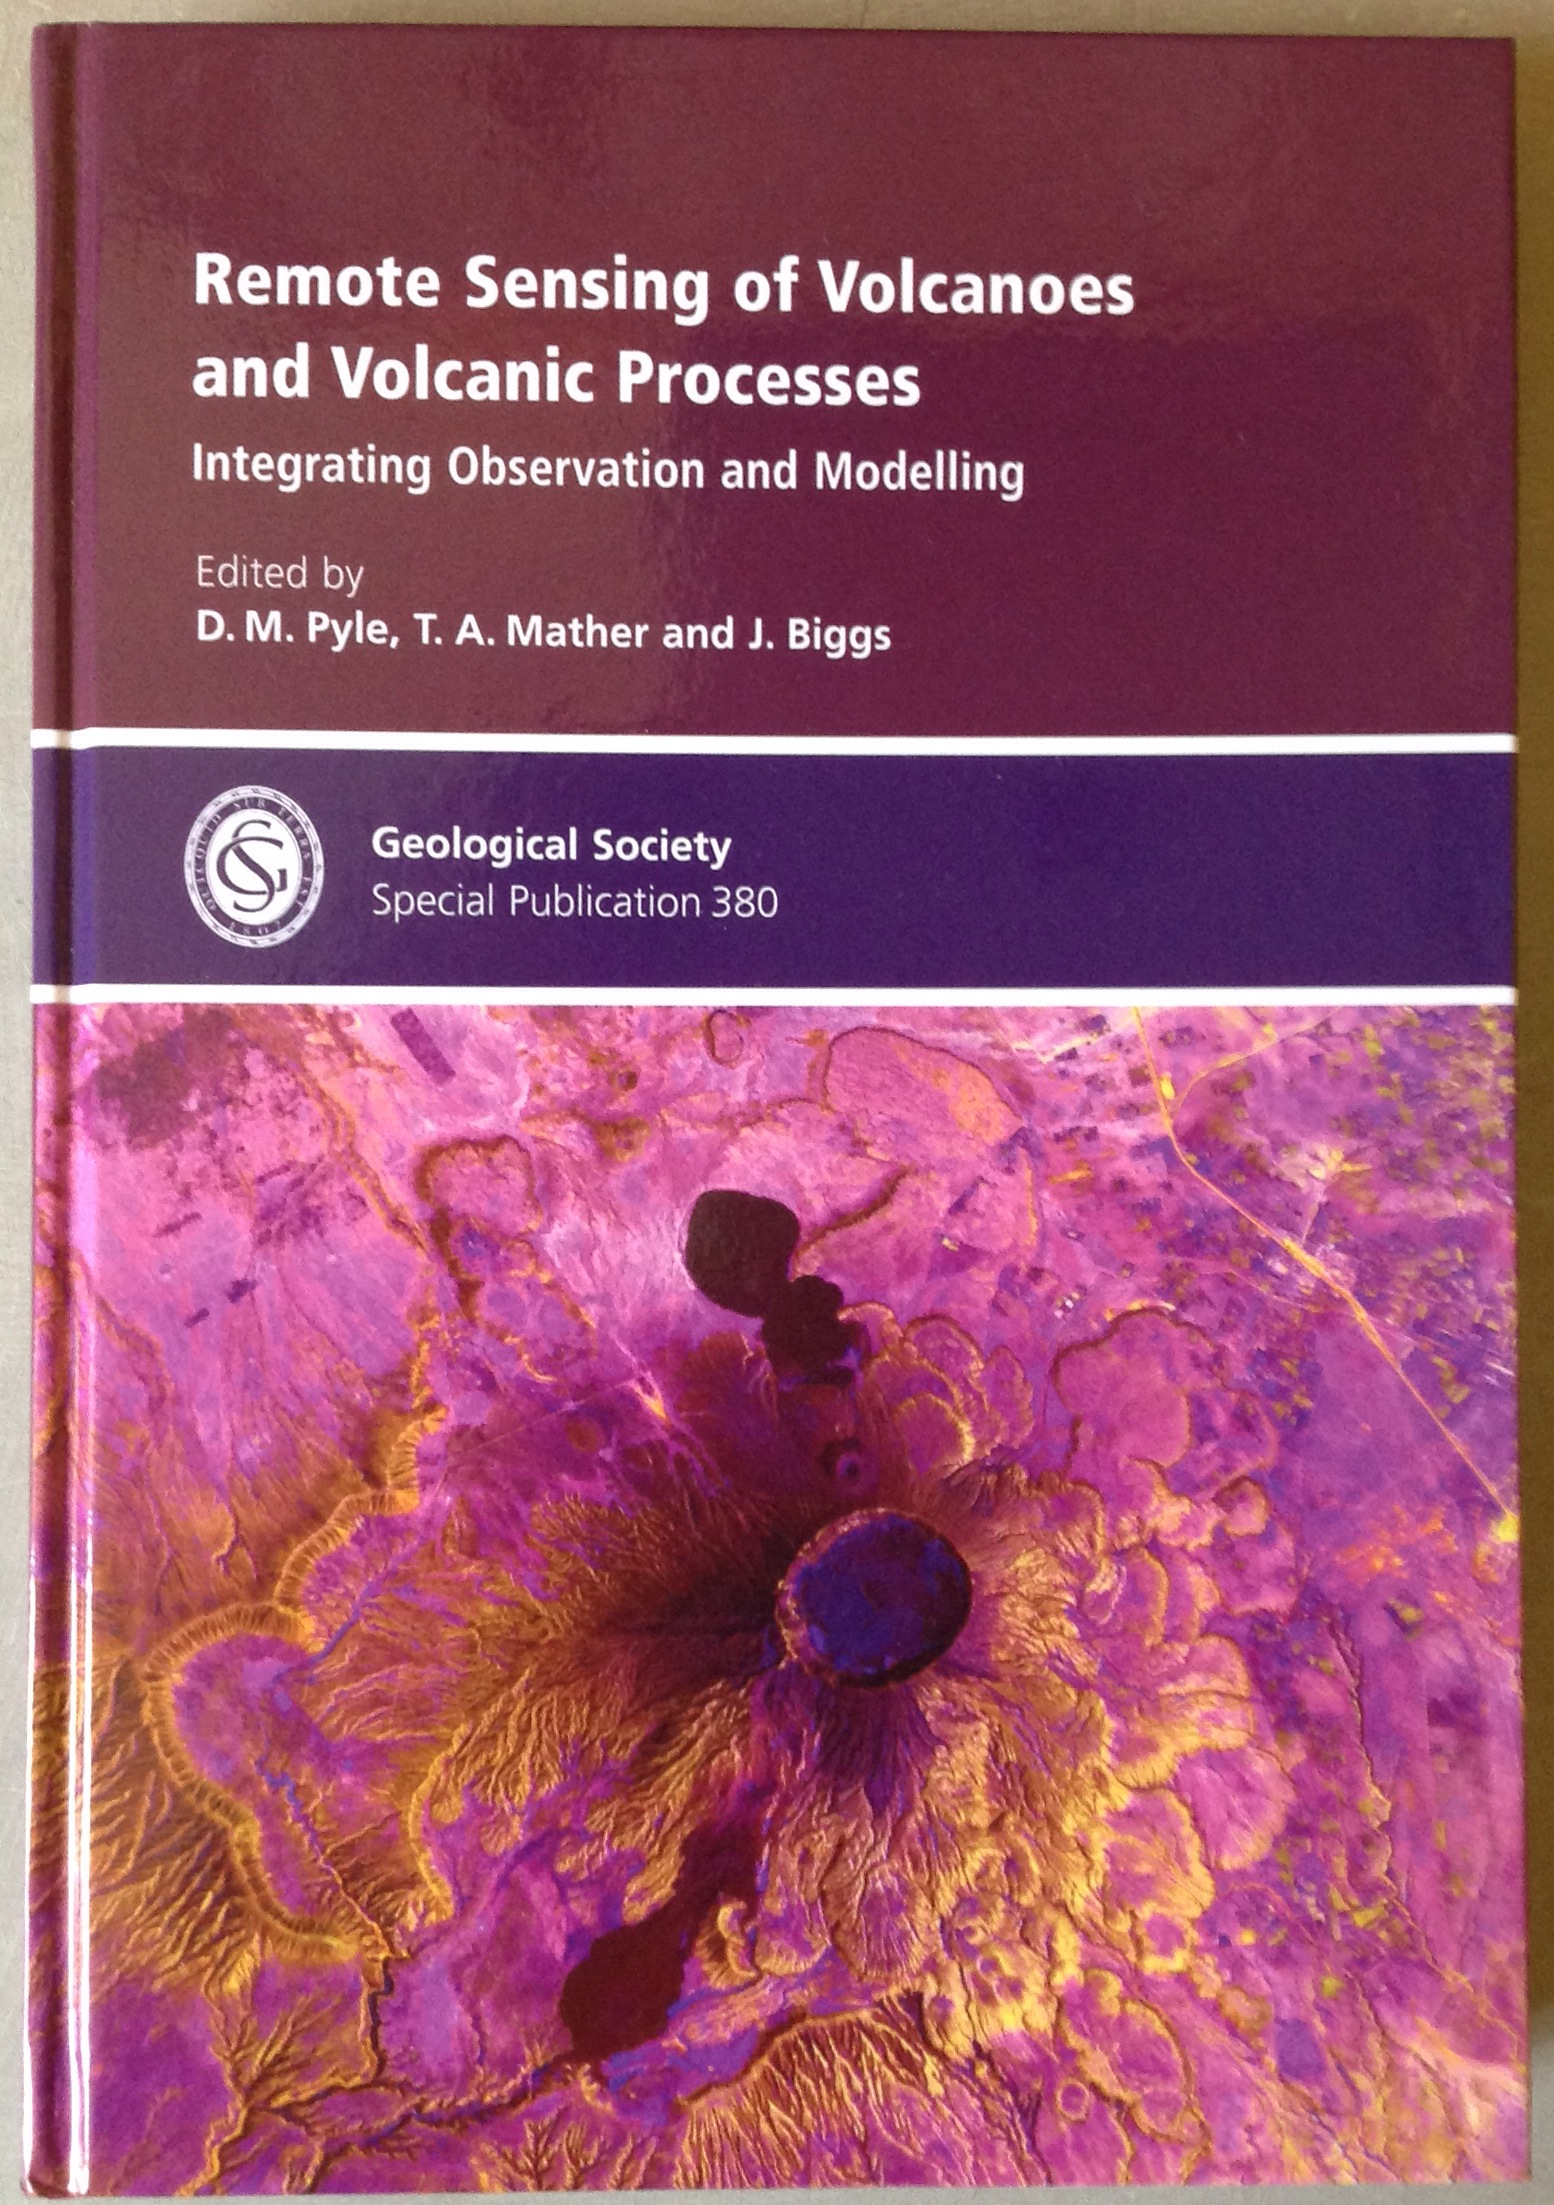 VolcanicDegassing | Remote sensing of volcanoes and volcanic processes